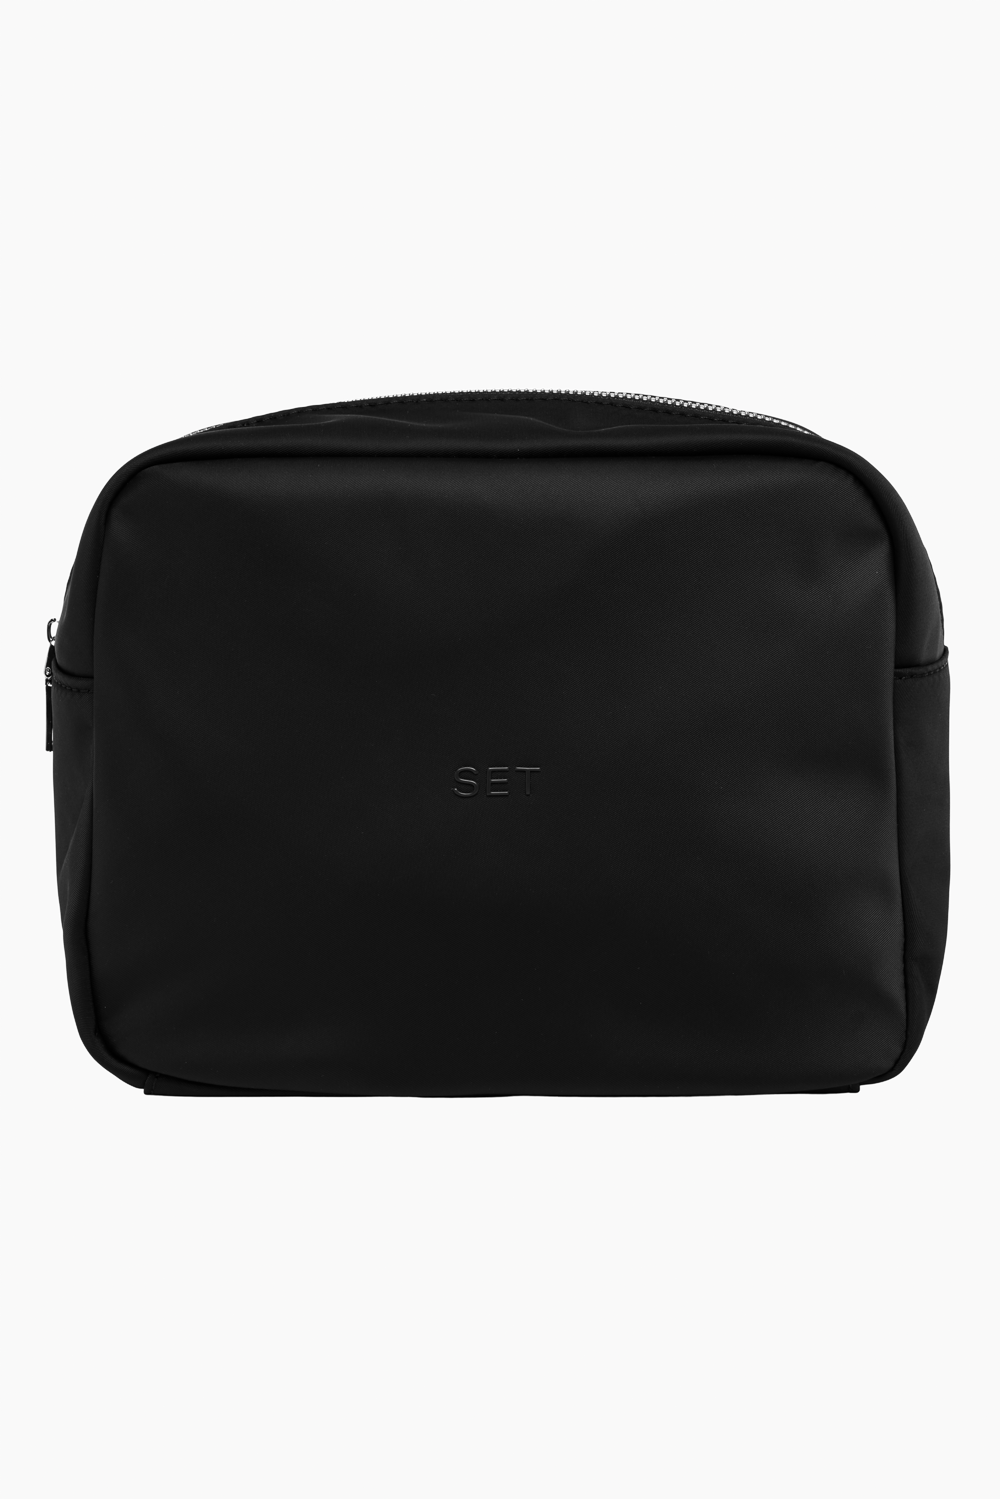 EVERYTHING BAG - ONYX Featured Image